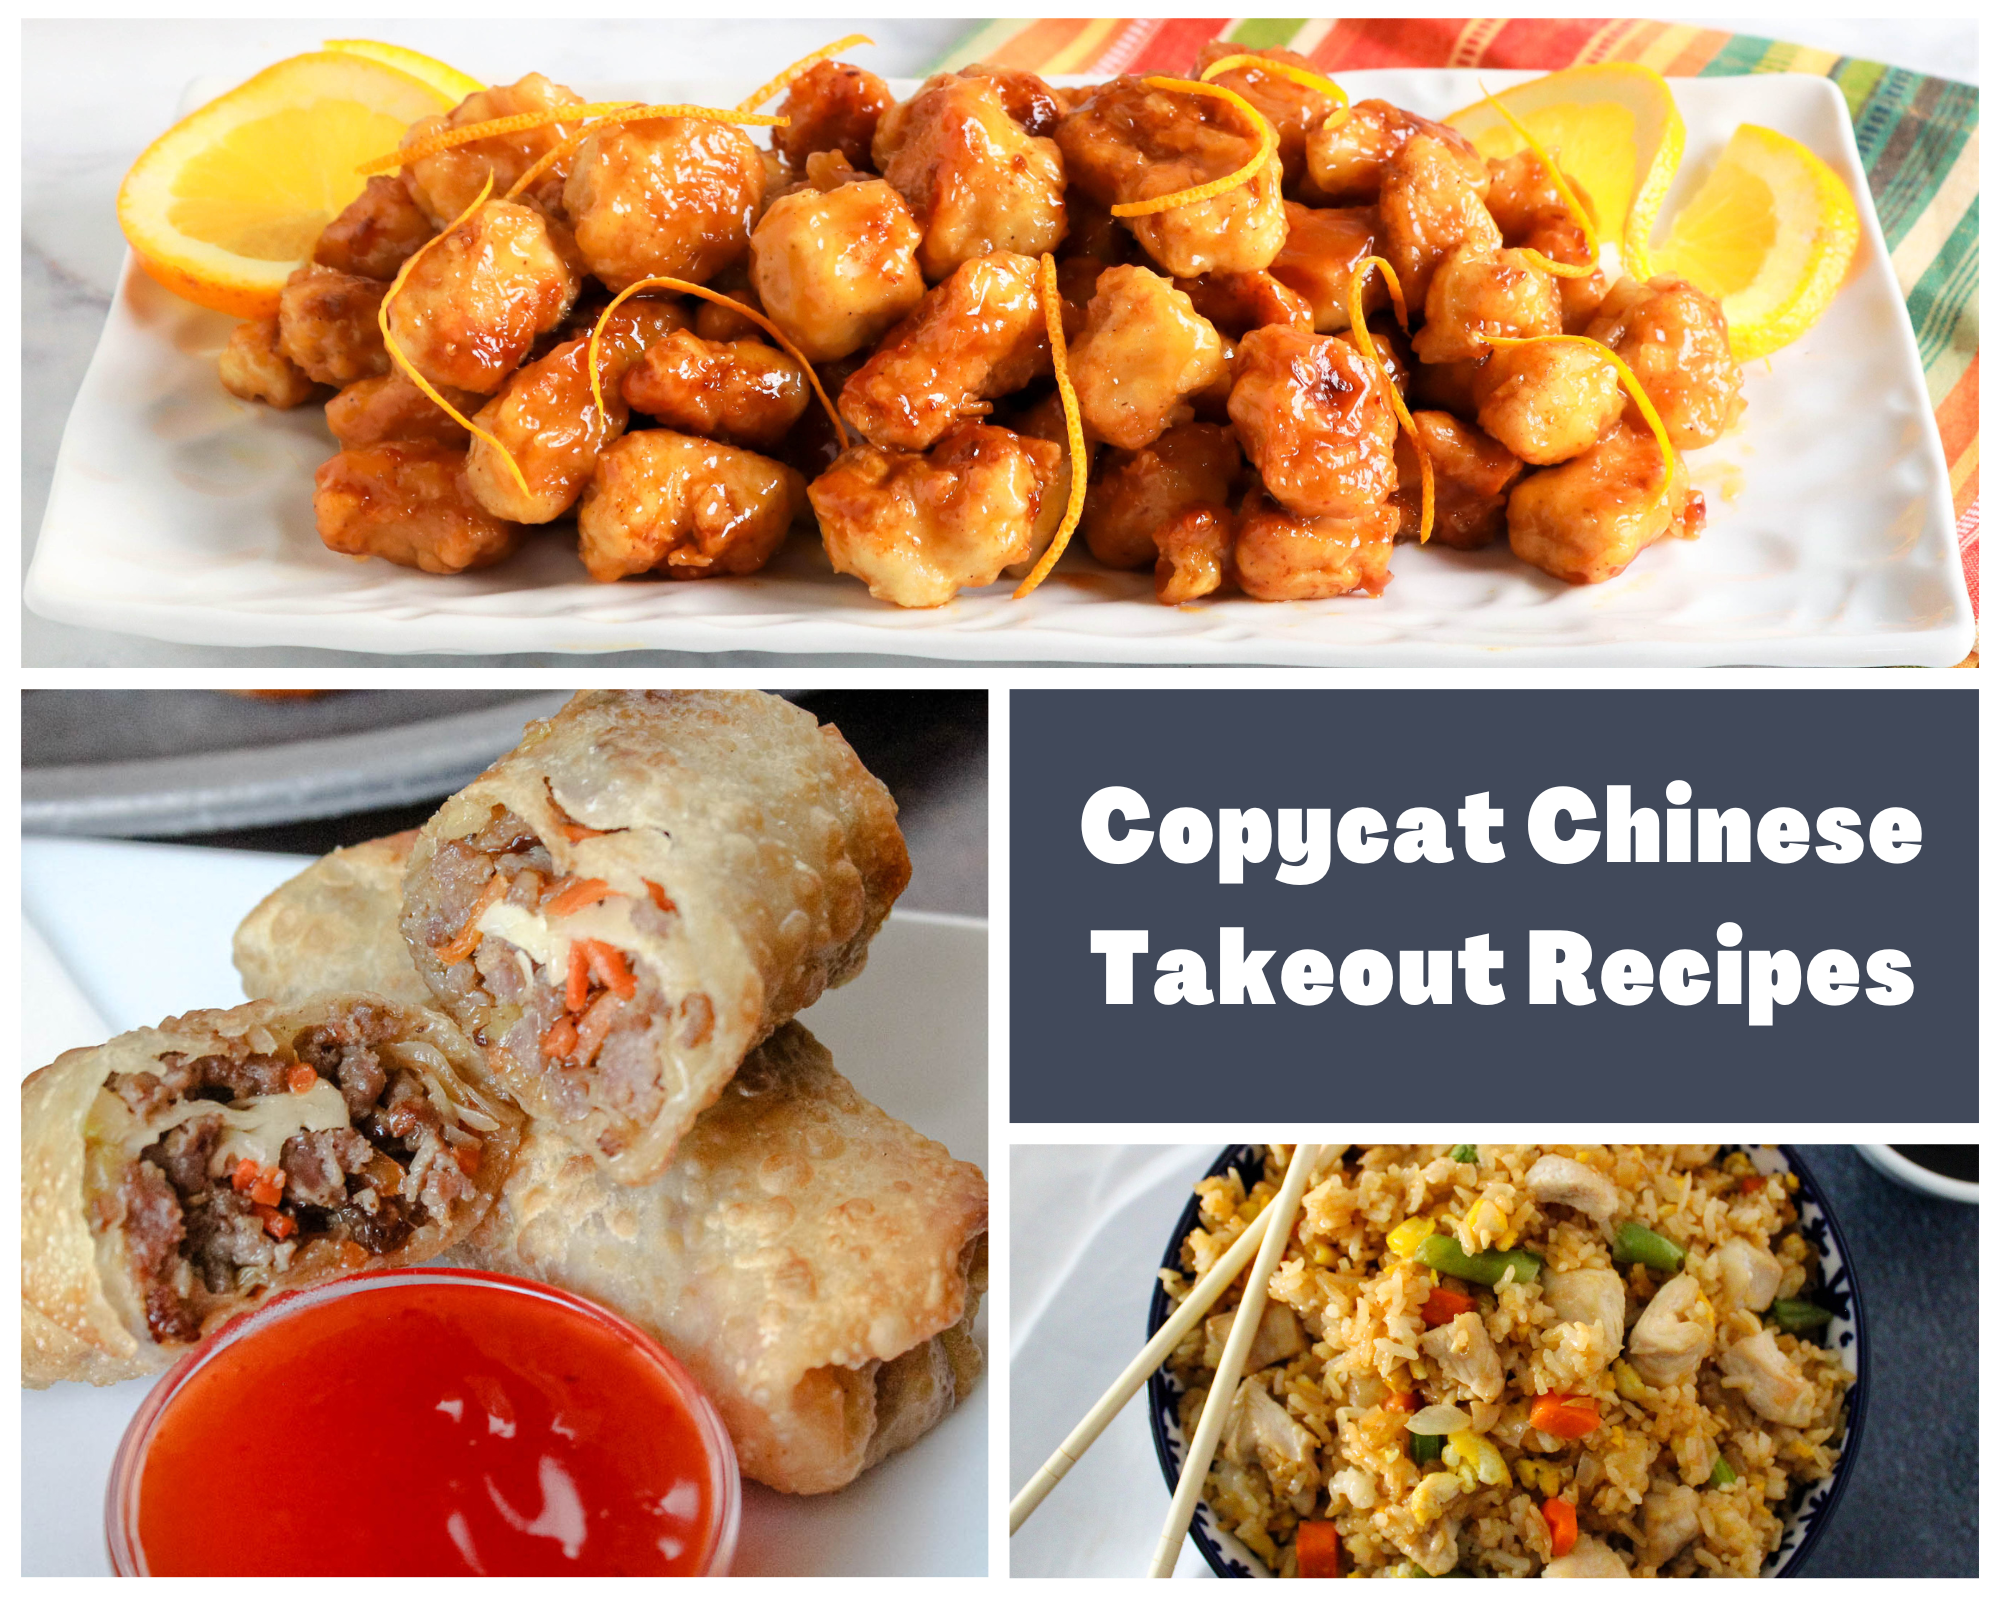 Copycat Chinese Takeout Recipes